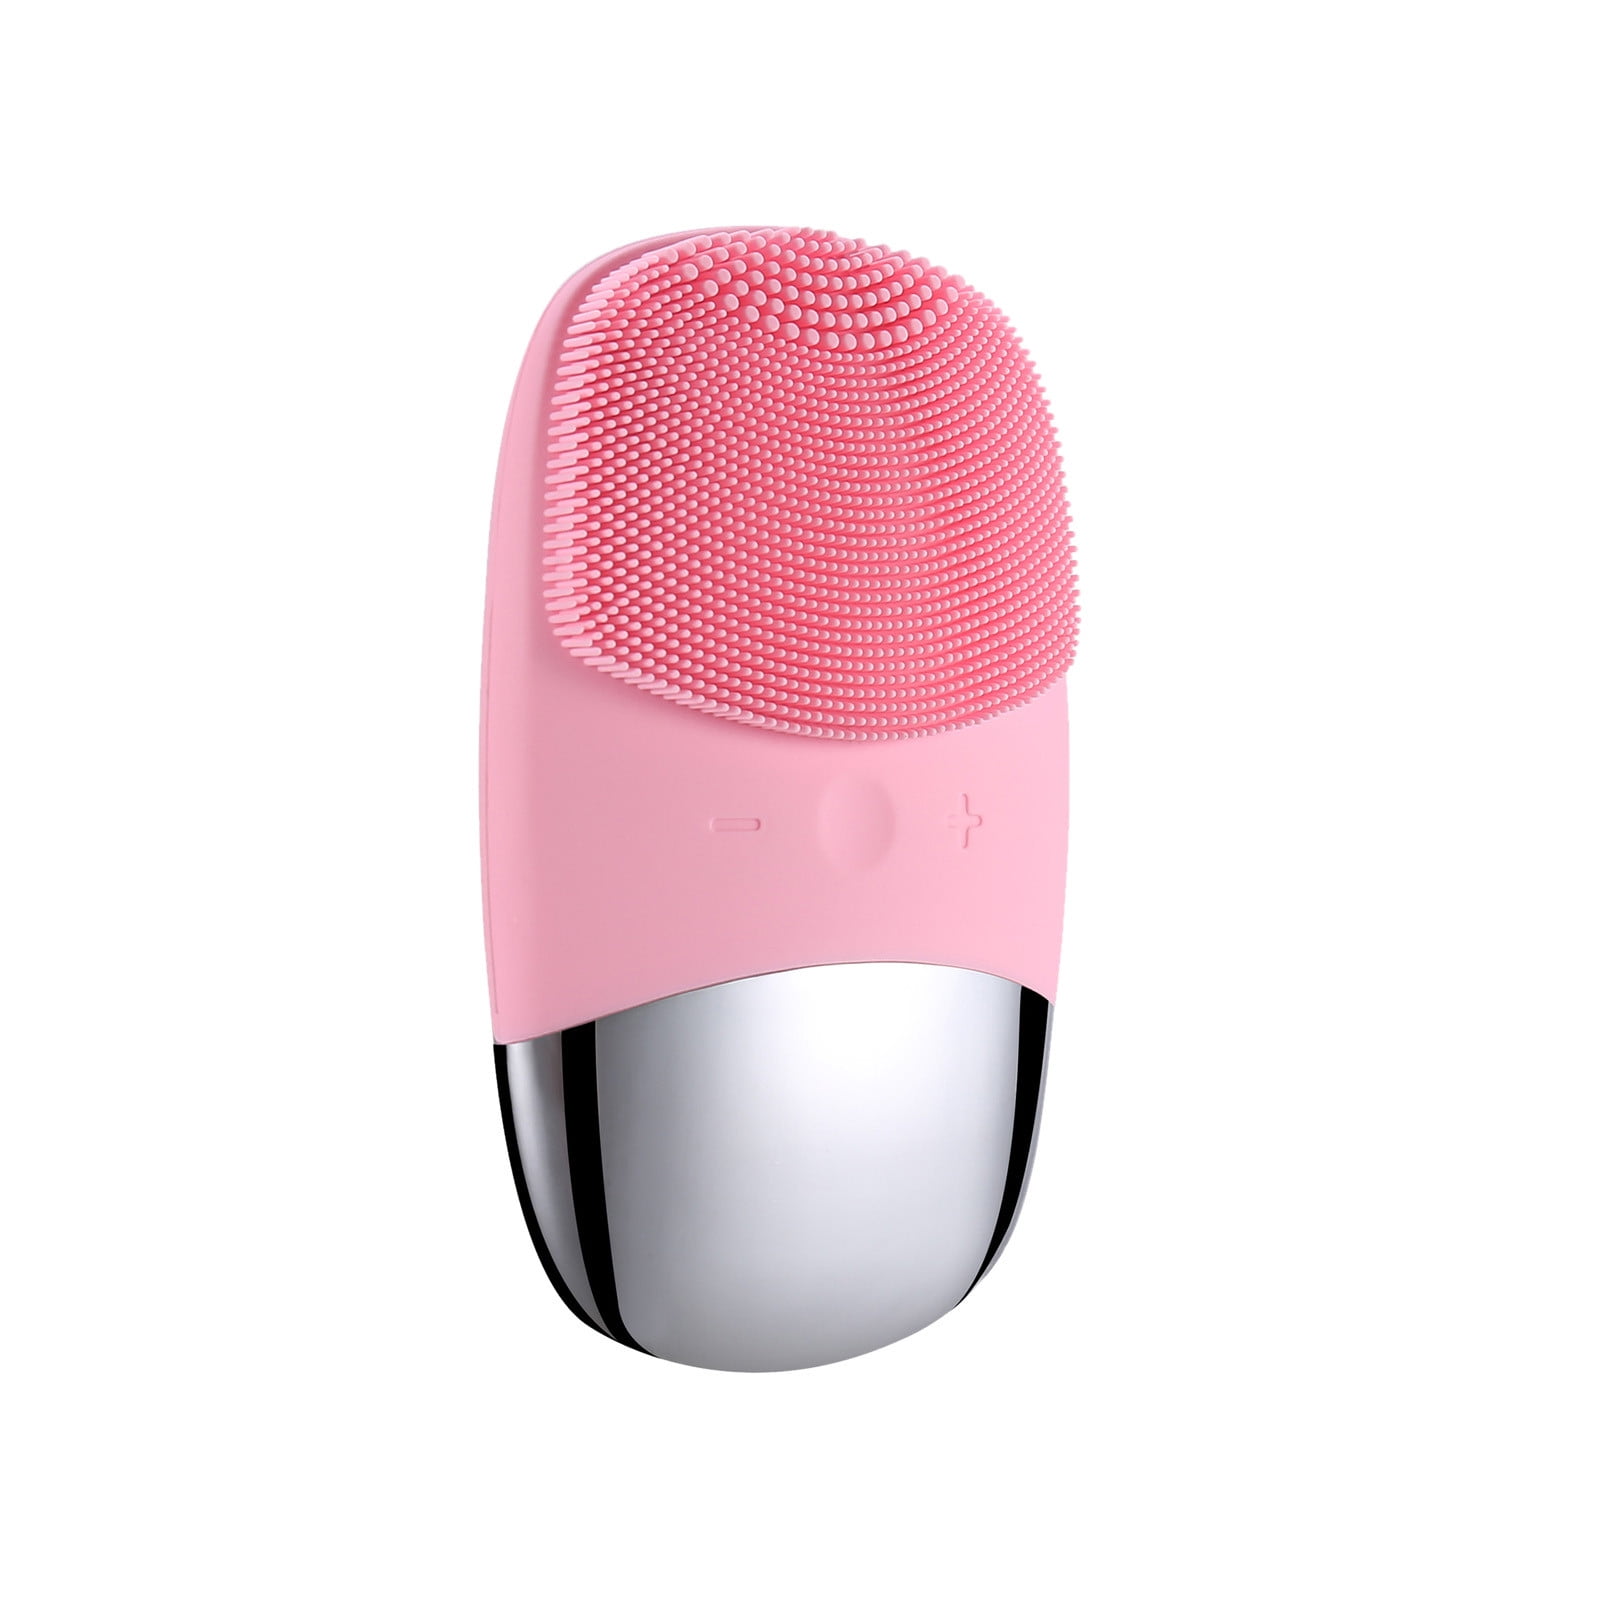 Sonic Facial Cleansing Brush Made Of Ultrahygienic Soft Silicone Waterproof Vibration Face For